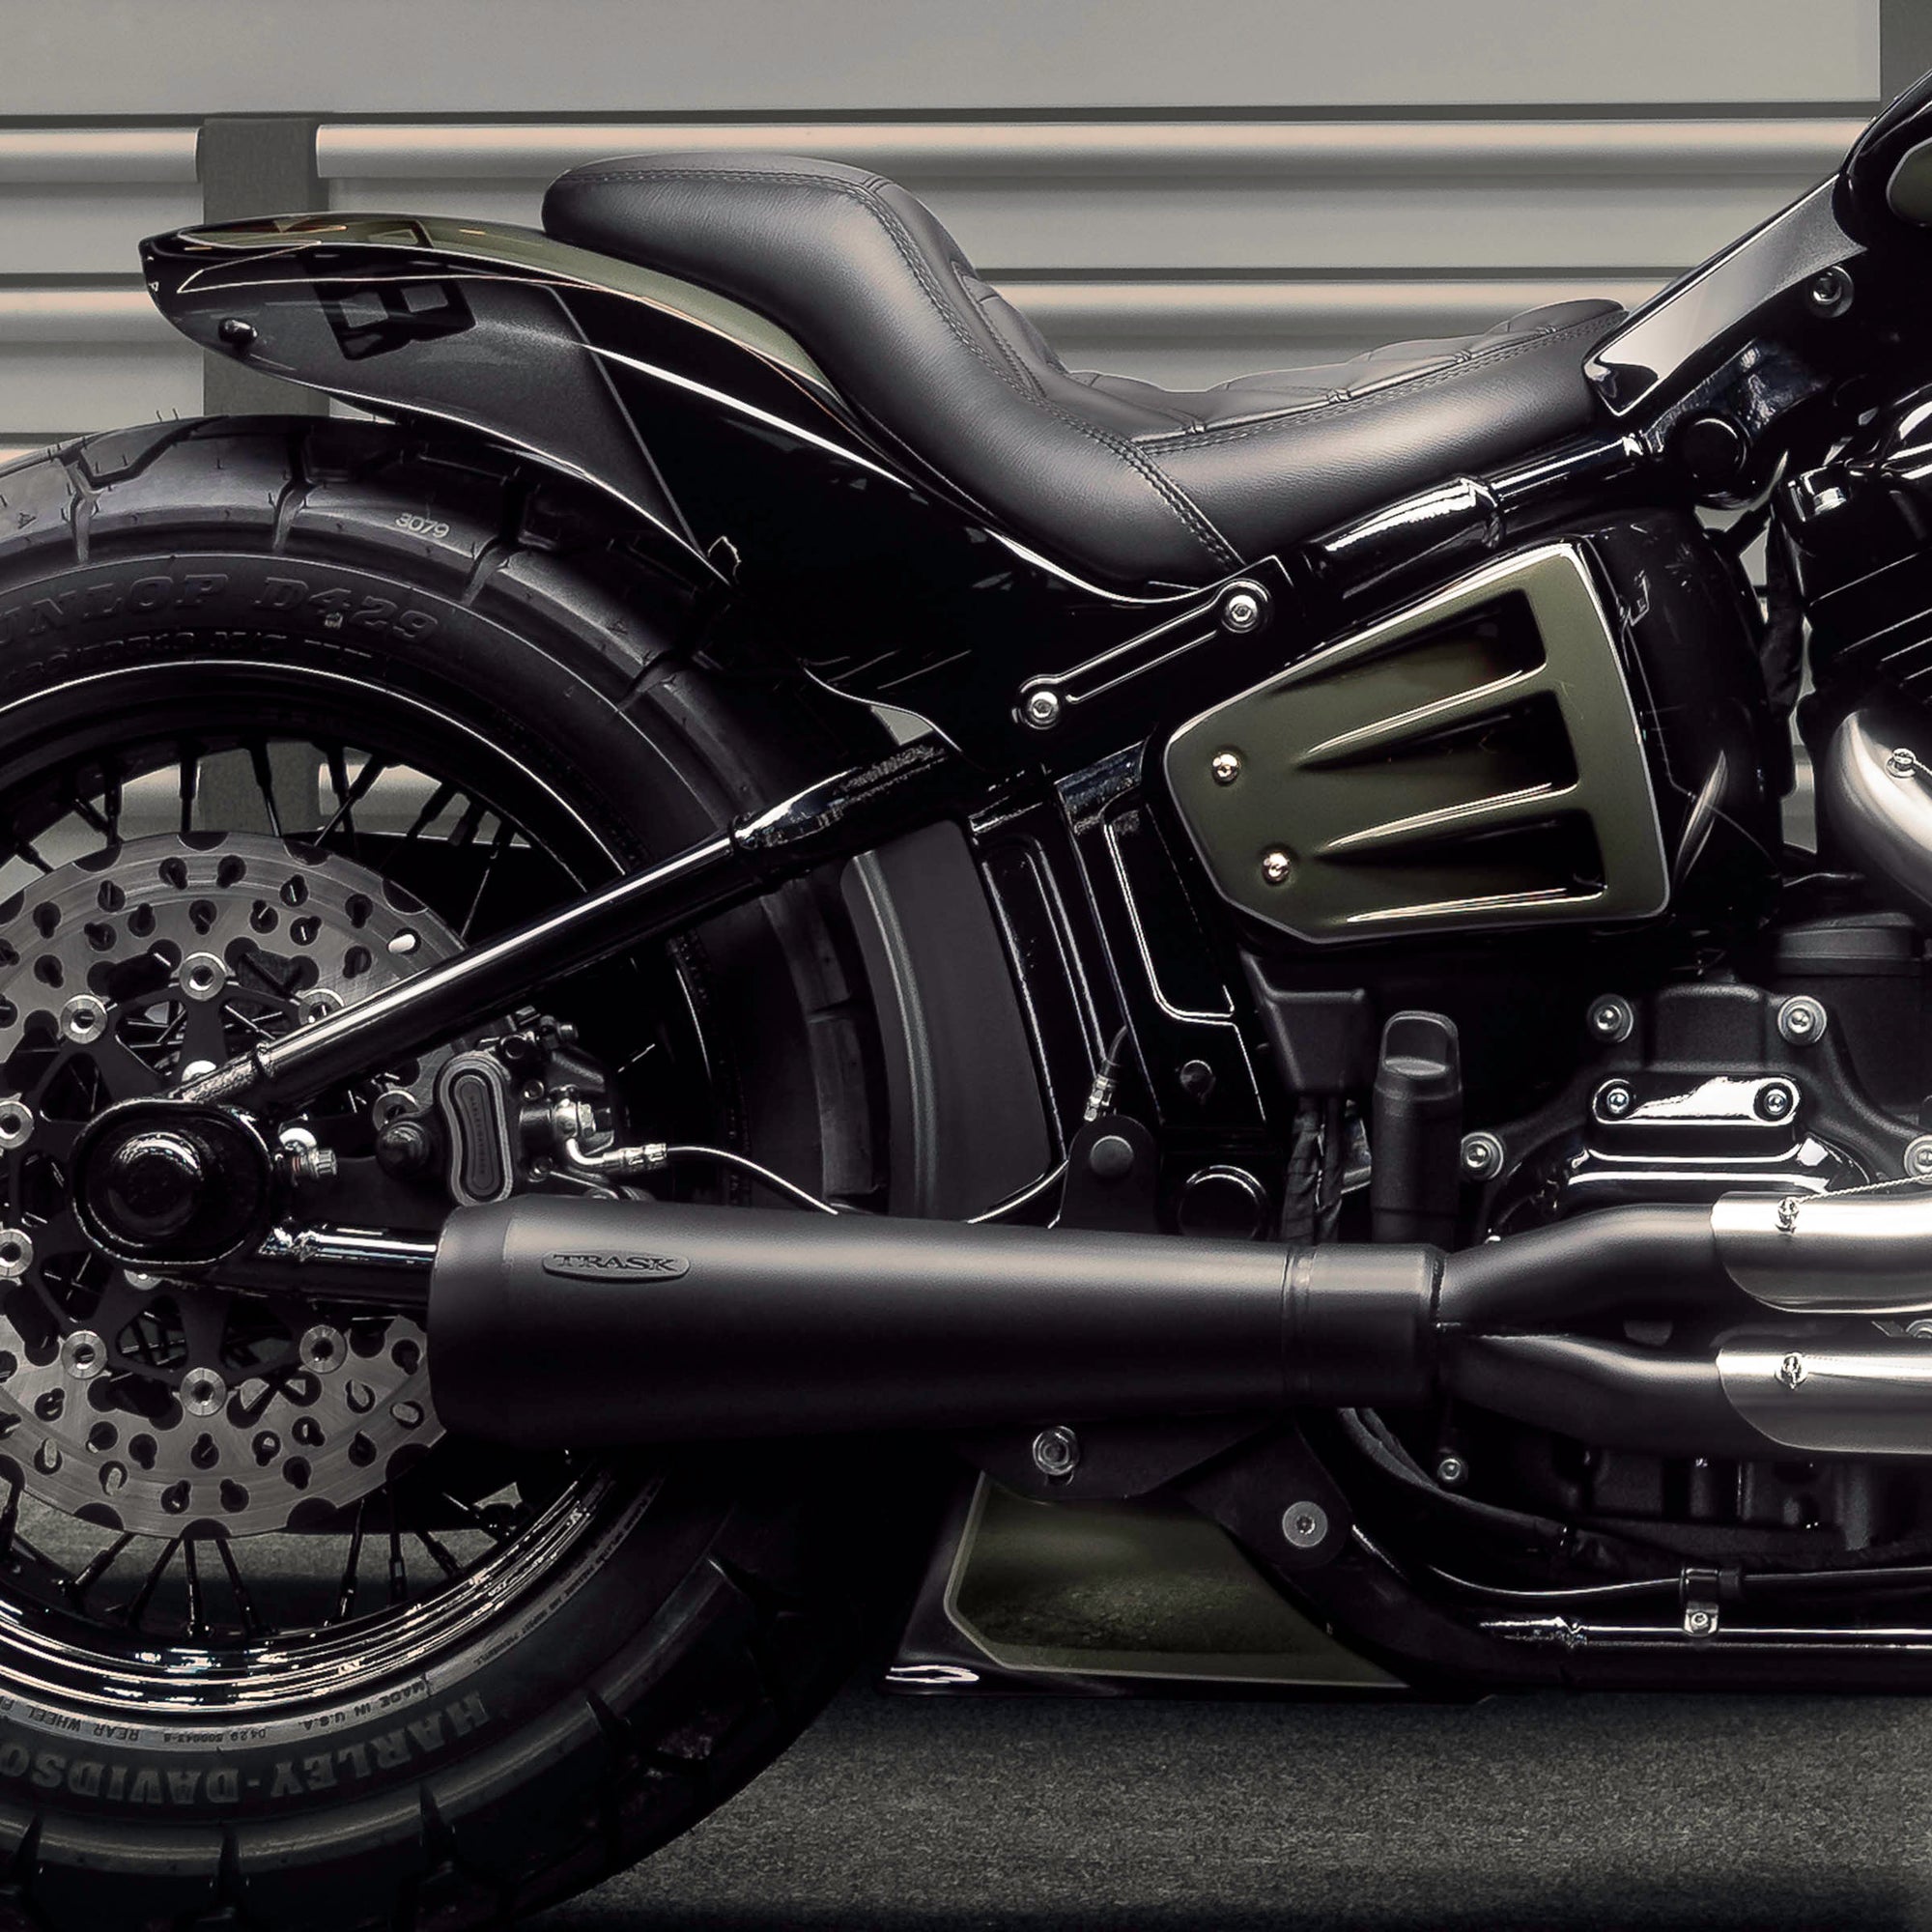 Zoomed and modified Harley Davidson Street Bob motorcycle with Killer Custom parts from the side in a modern garage